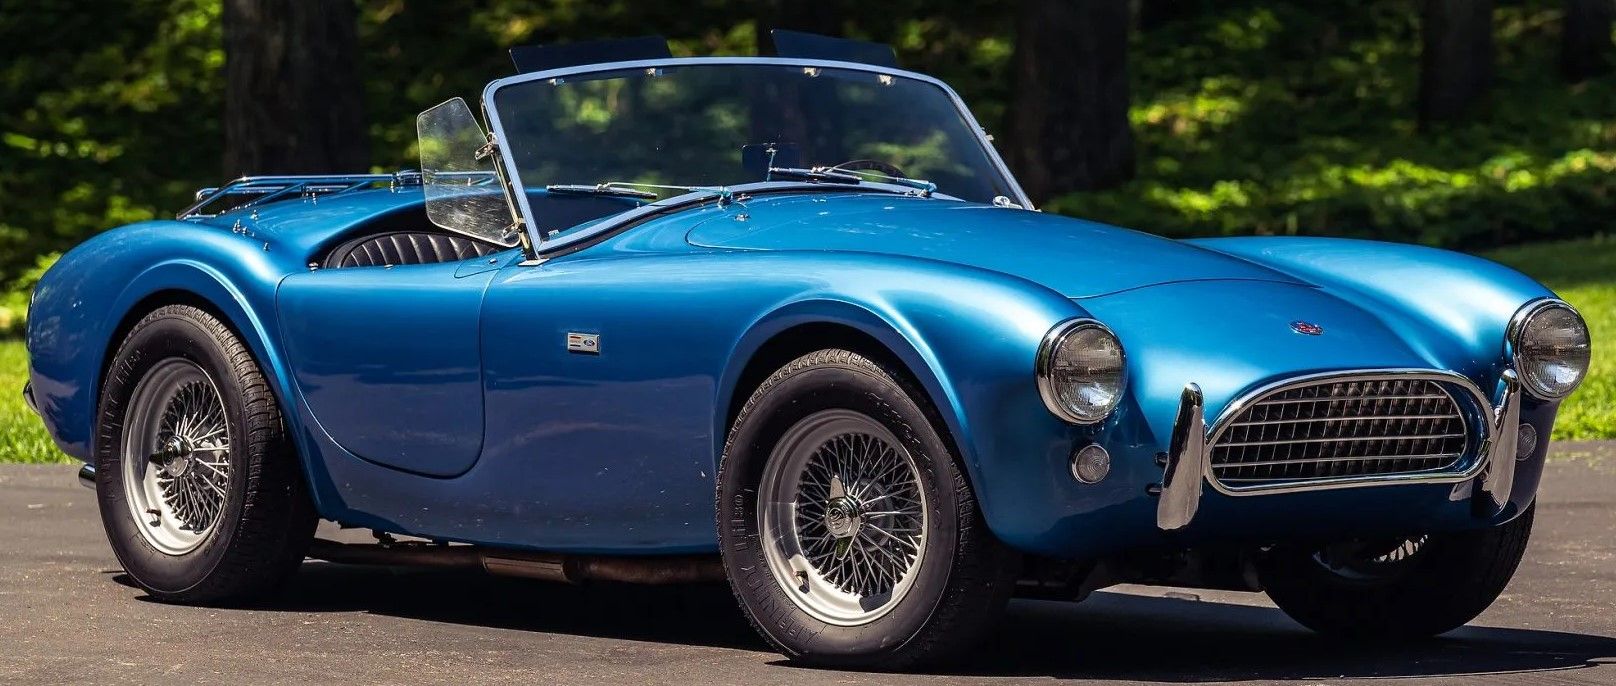 Blue1963 Shelby Cobra CSX 2000 Series parked outdoors